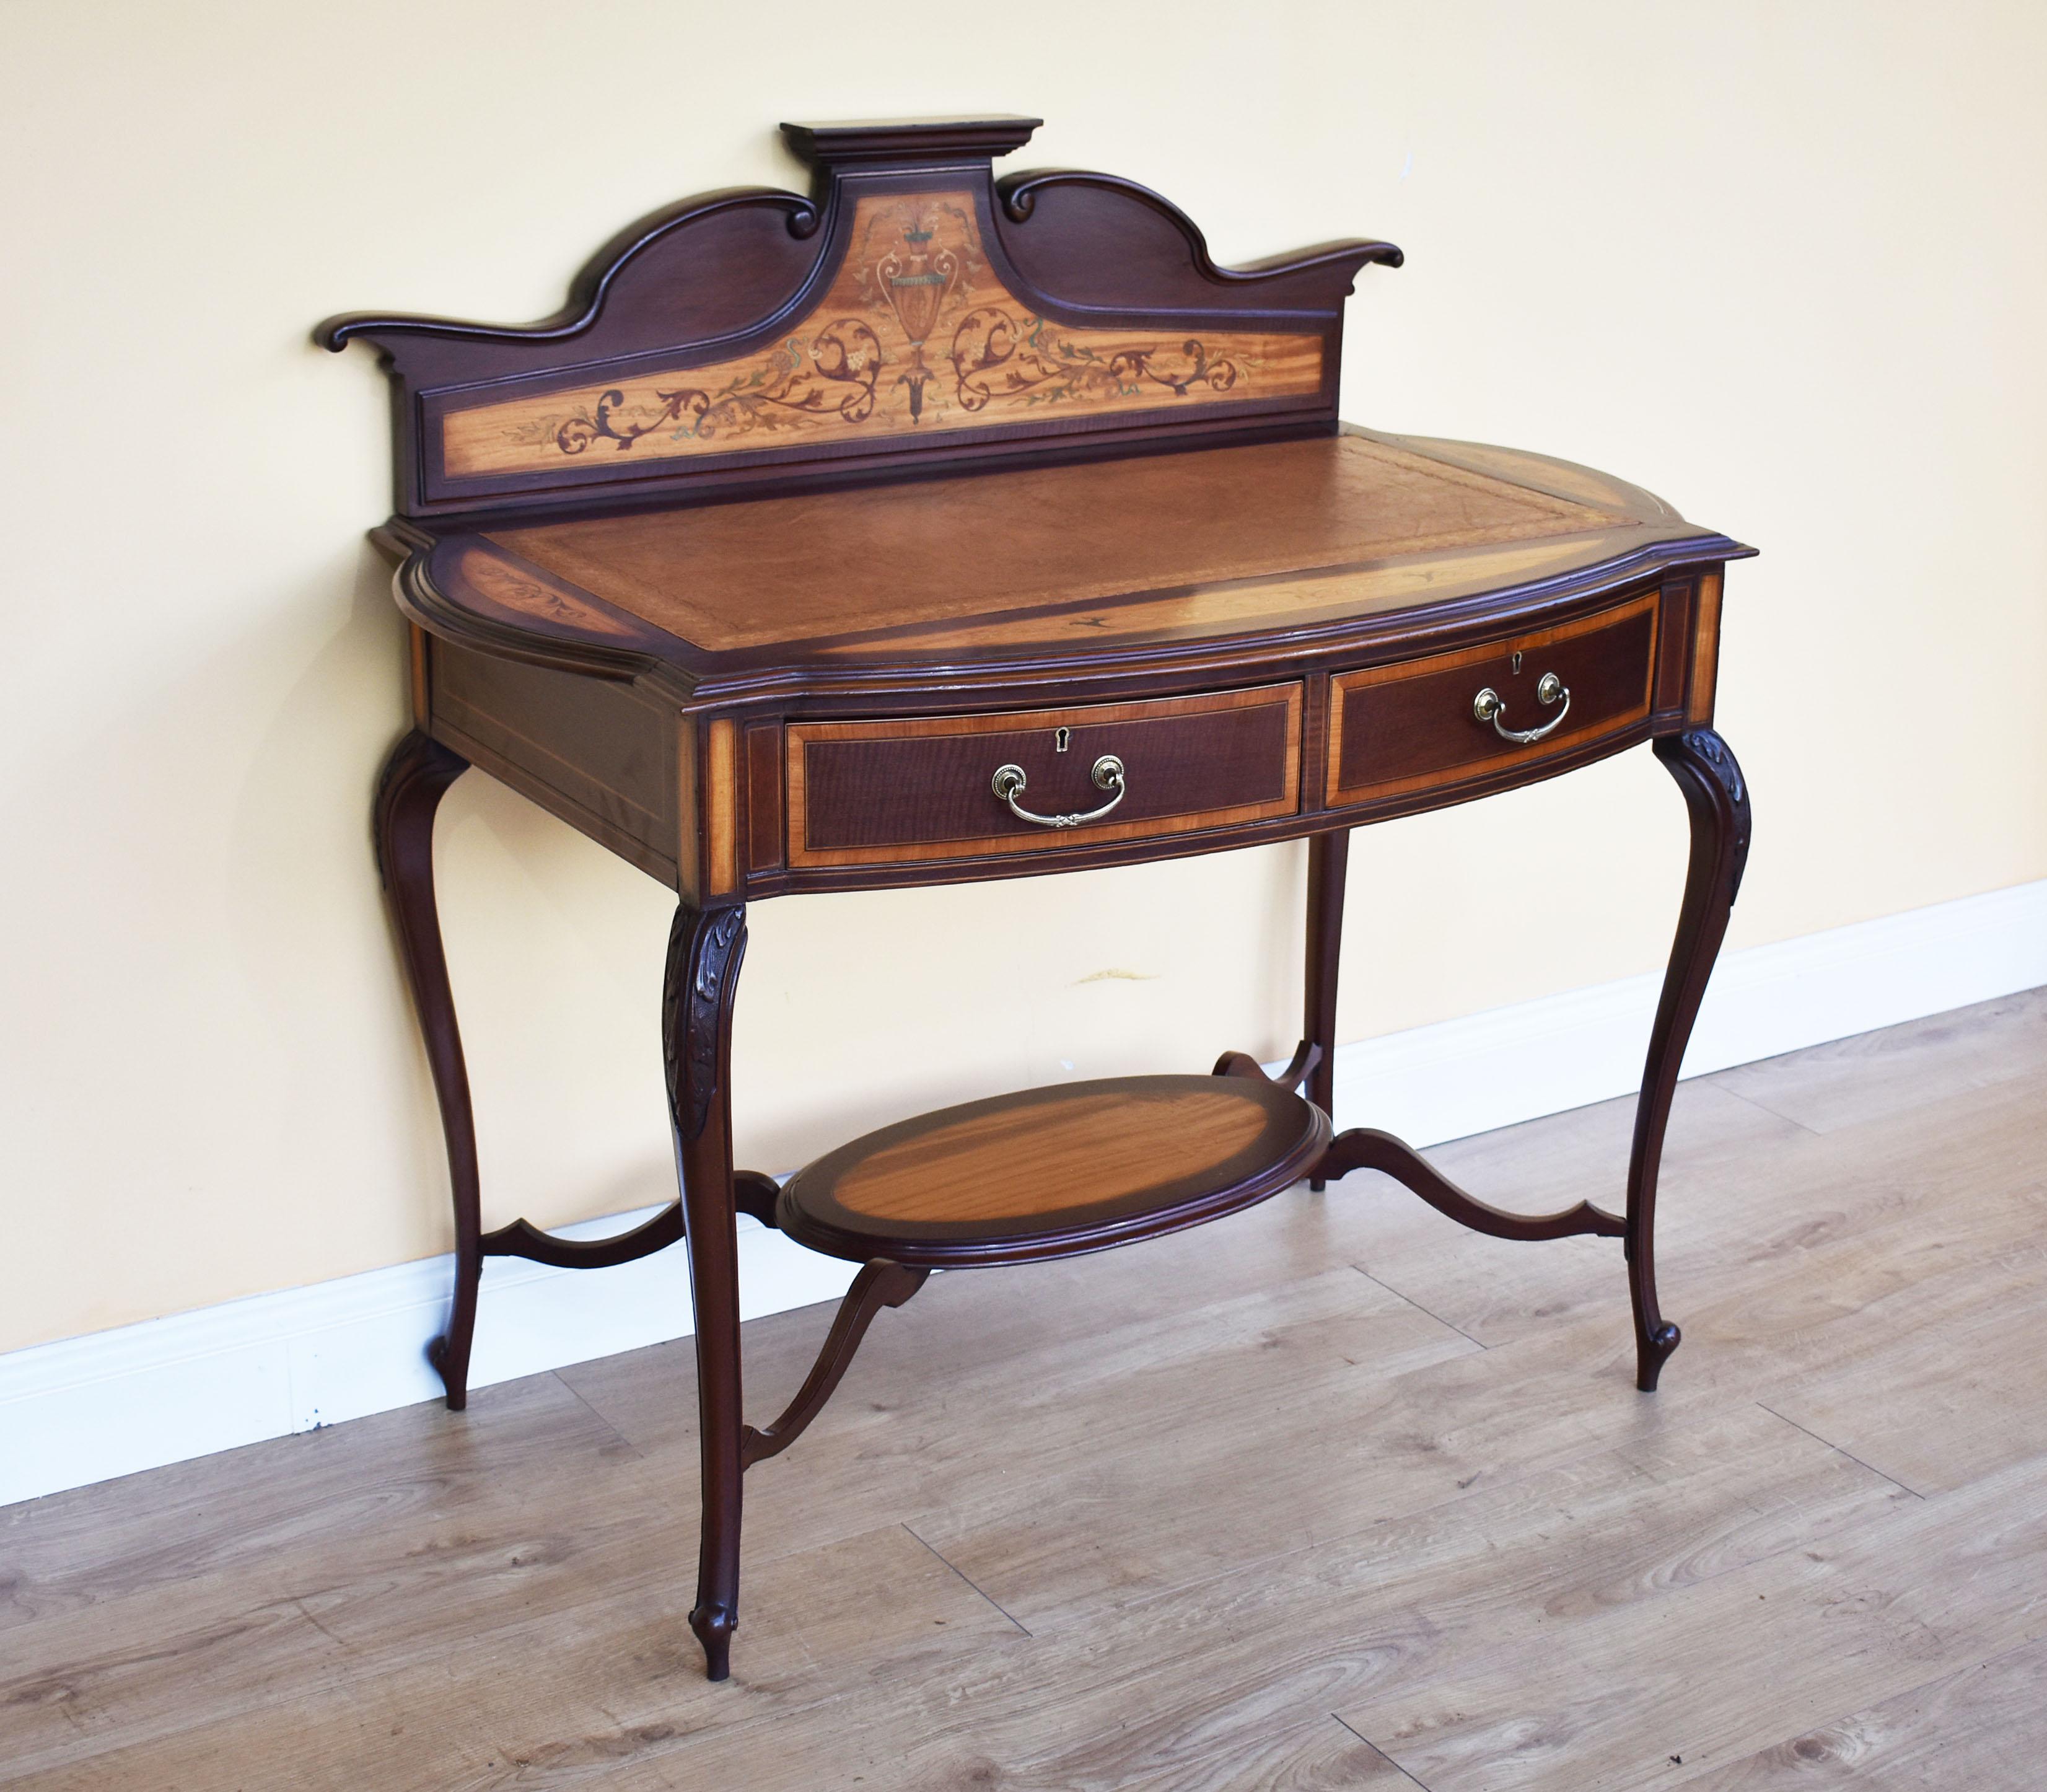 For sale is a fine quality 19th century mahogany and satinwood inlaid ladies writing table. The piece has a raised and shaped gallery to the back, with a satinwood panel profusely inlaid with various woods, over a tan leather insert with decorative